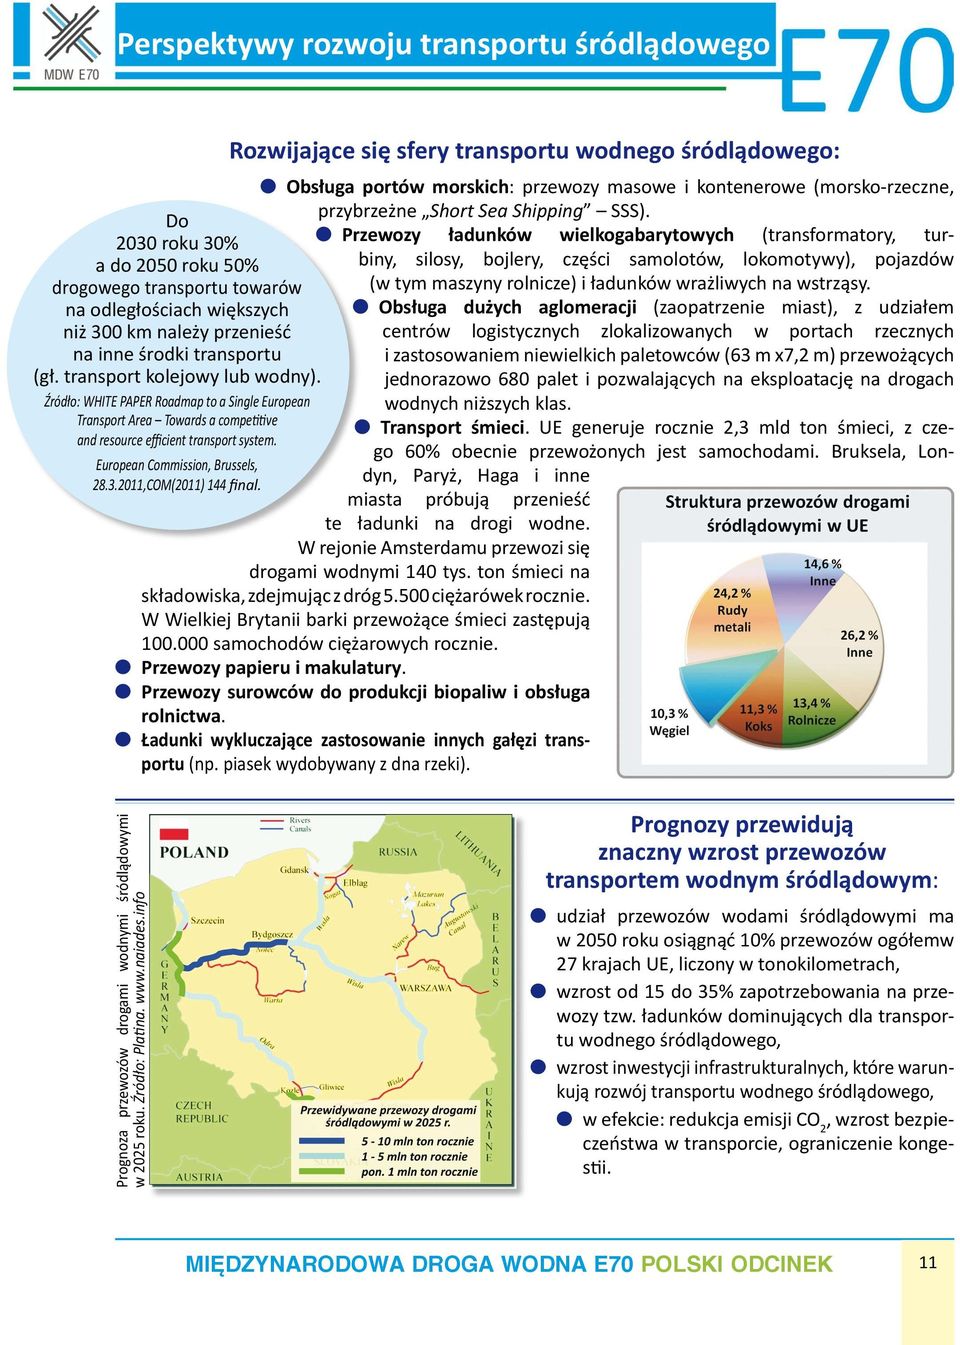 Źródło: WHITE PAPER Roadmap to a Single European Transport Area Towards a competitive and resource efficient transport system.